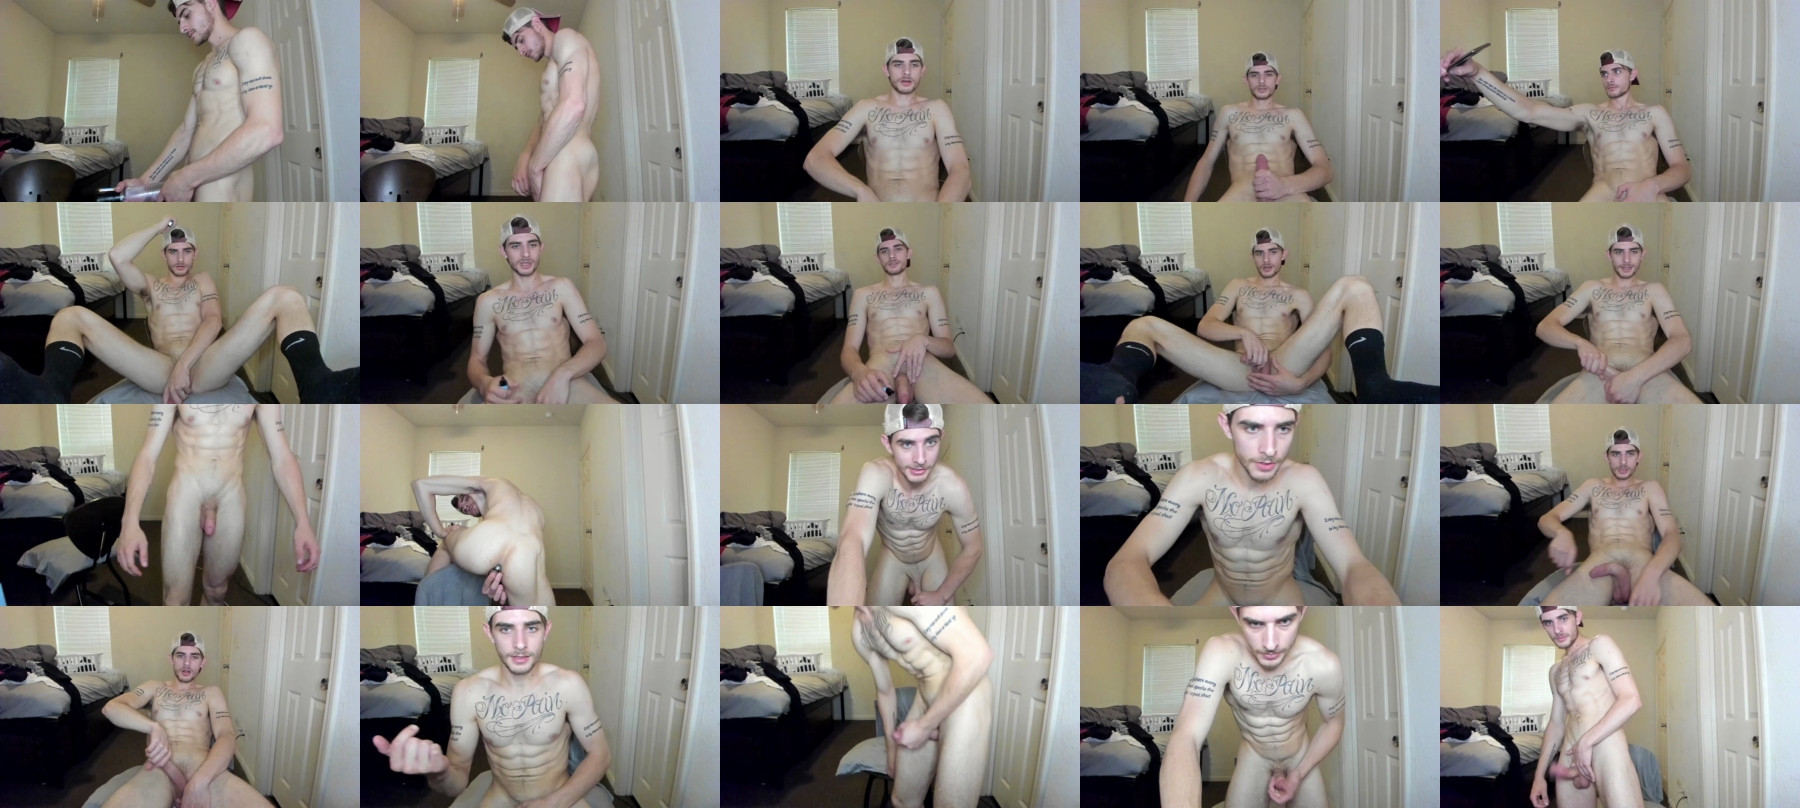 Willyt98 Topless CAM SHOW @ Chaturbate 21-05-2021